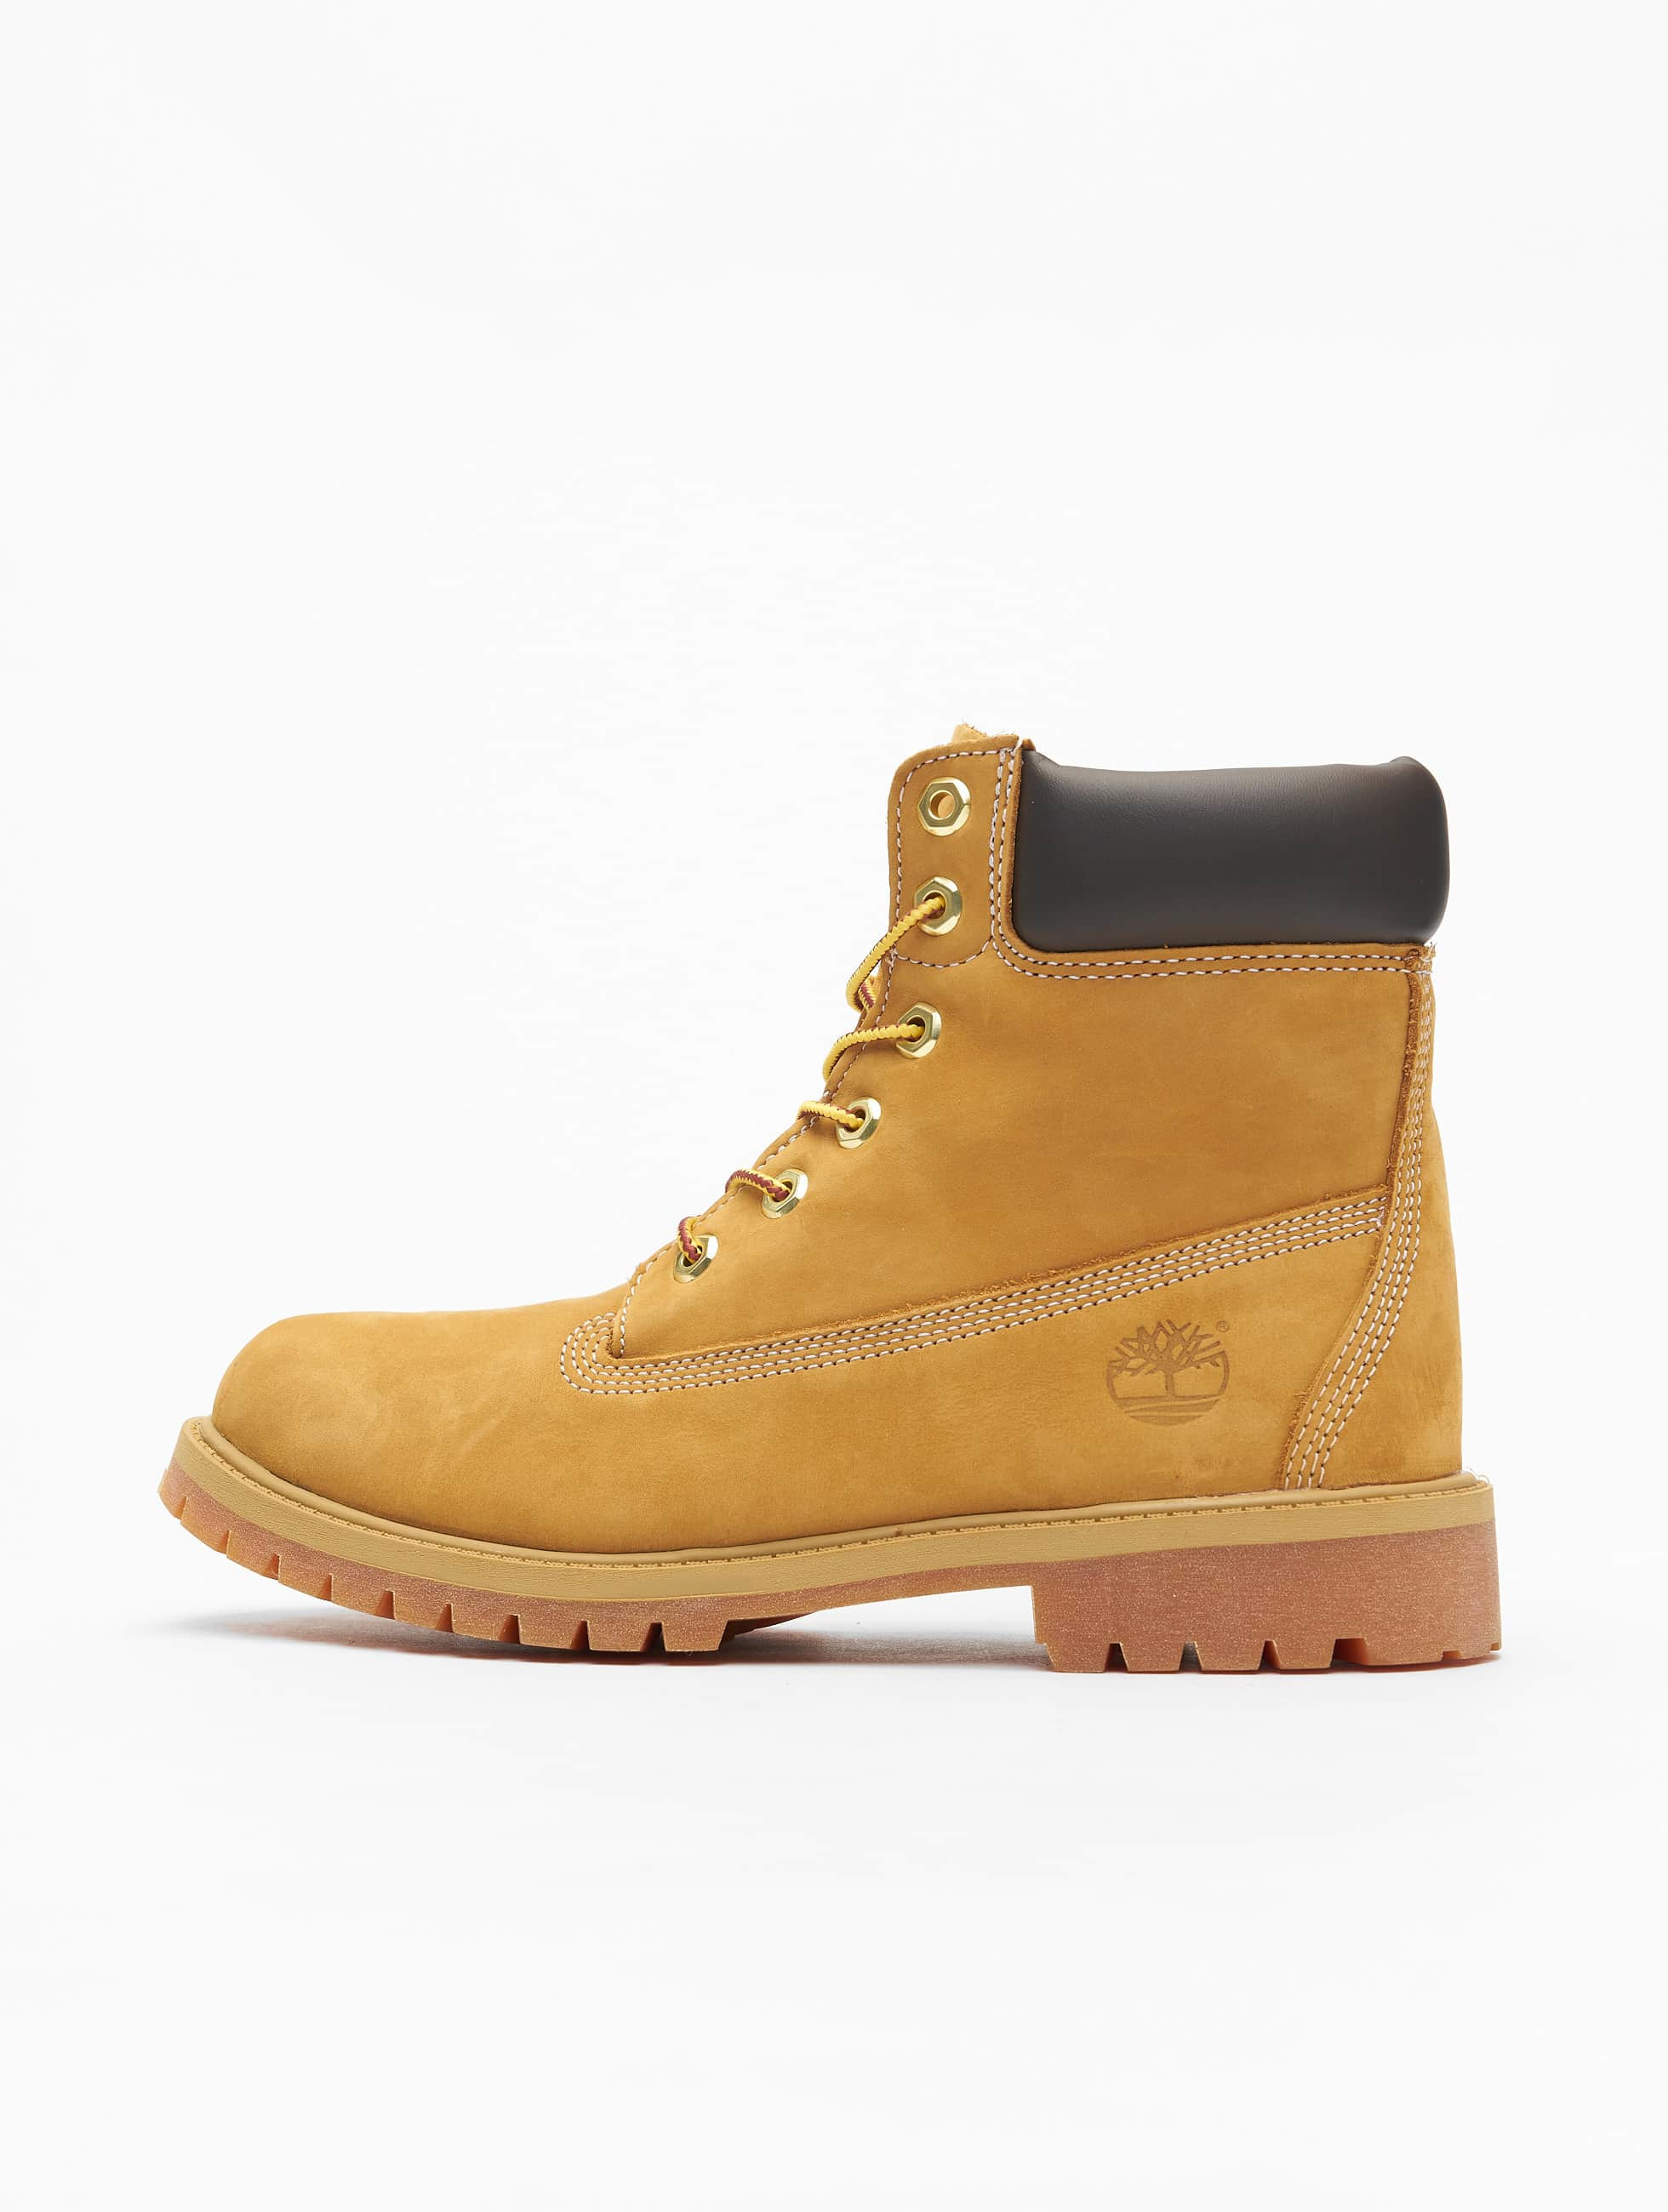 Timberland 6 In Premium brun Chaussures montantes femme